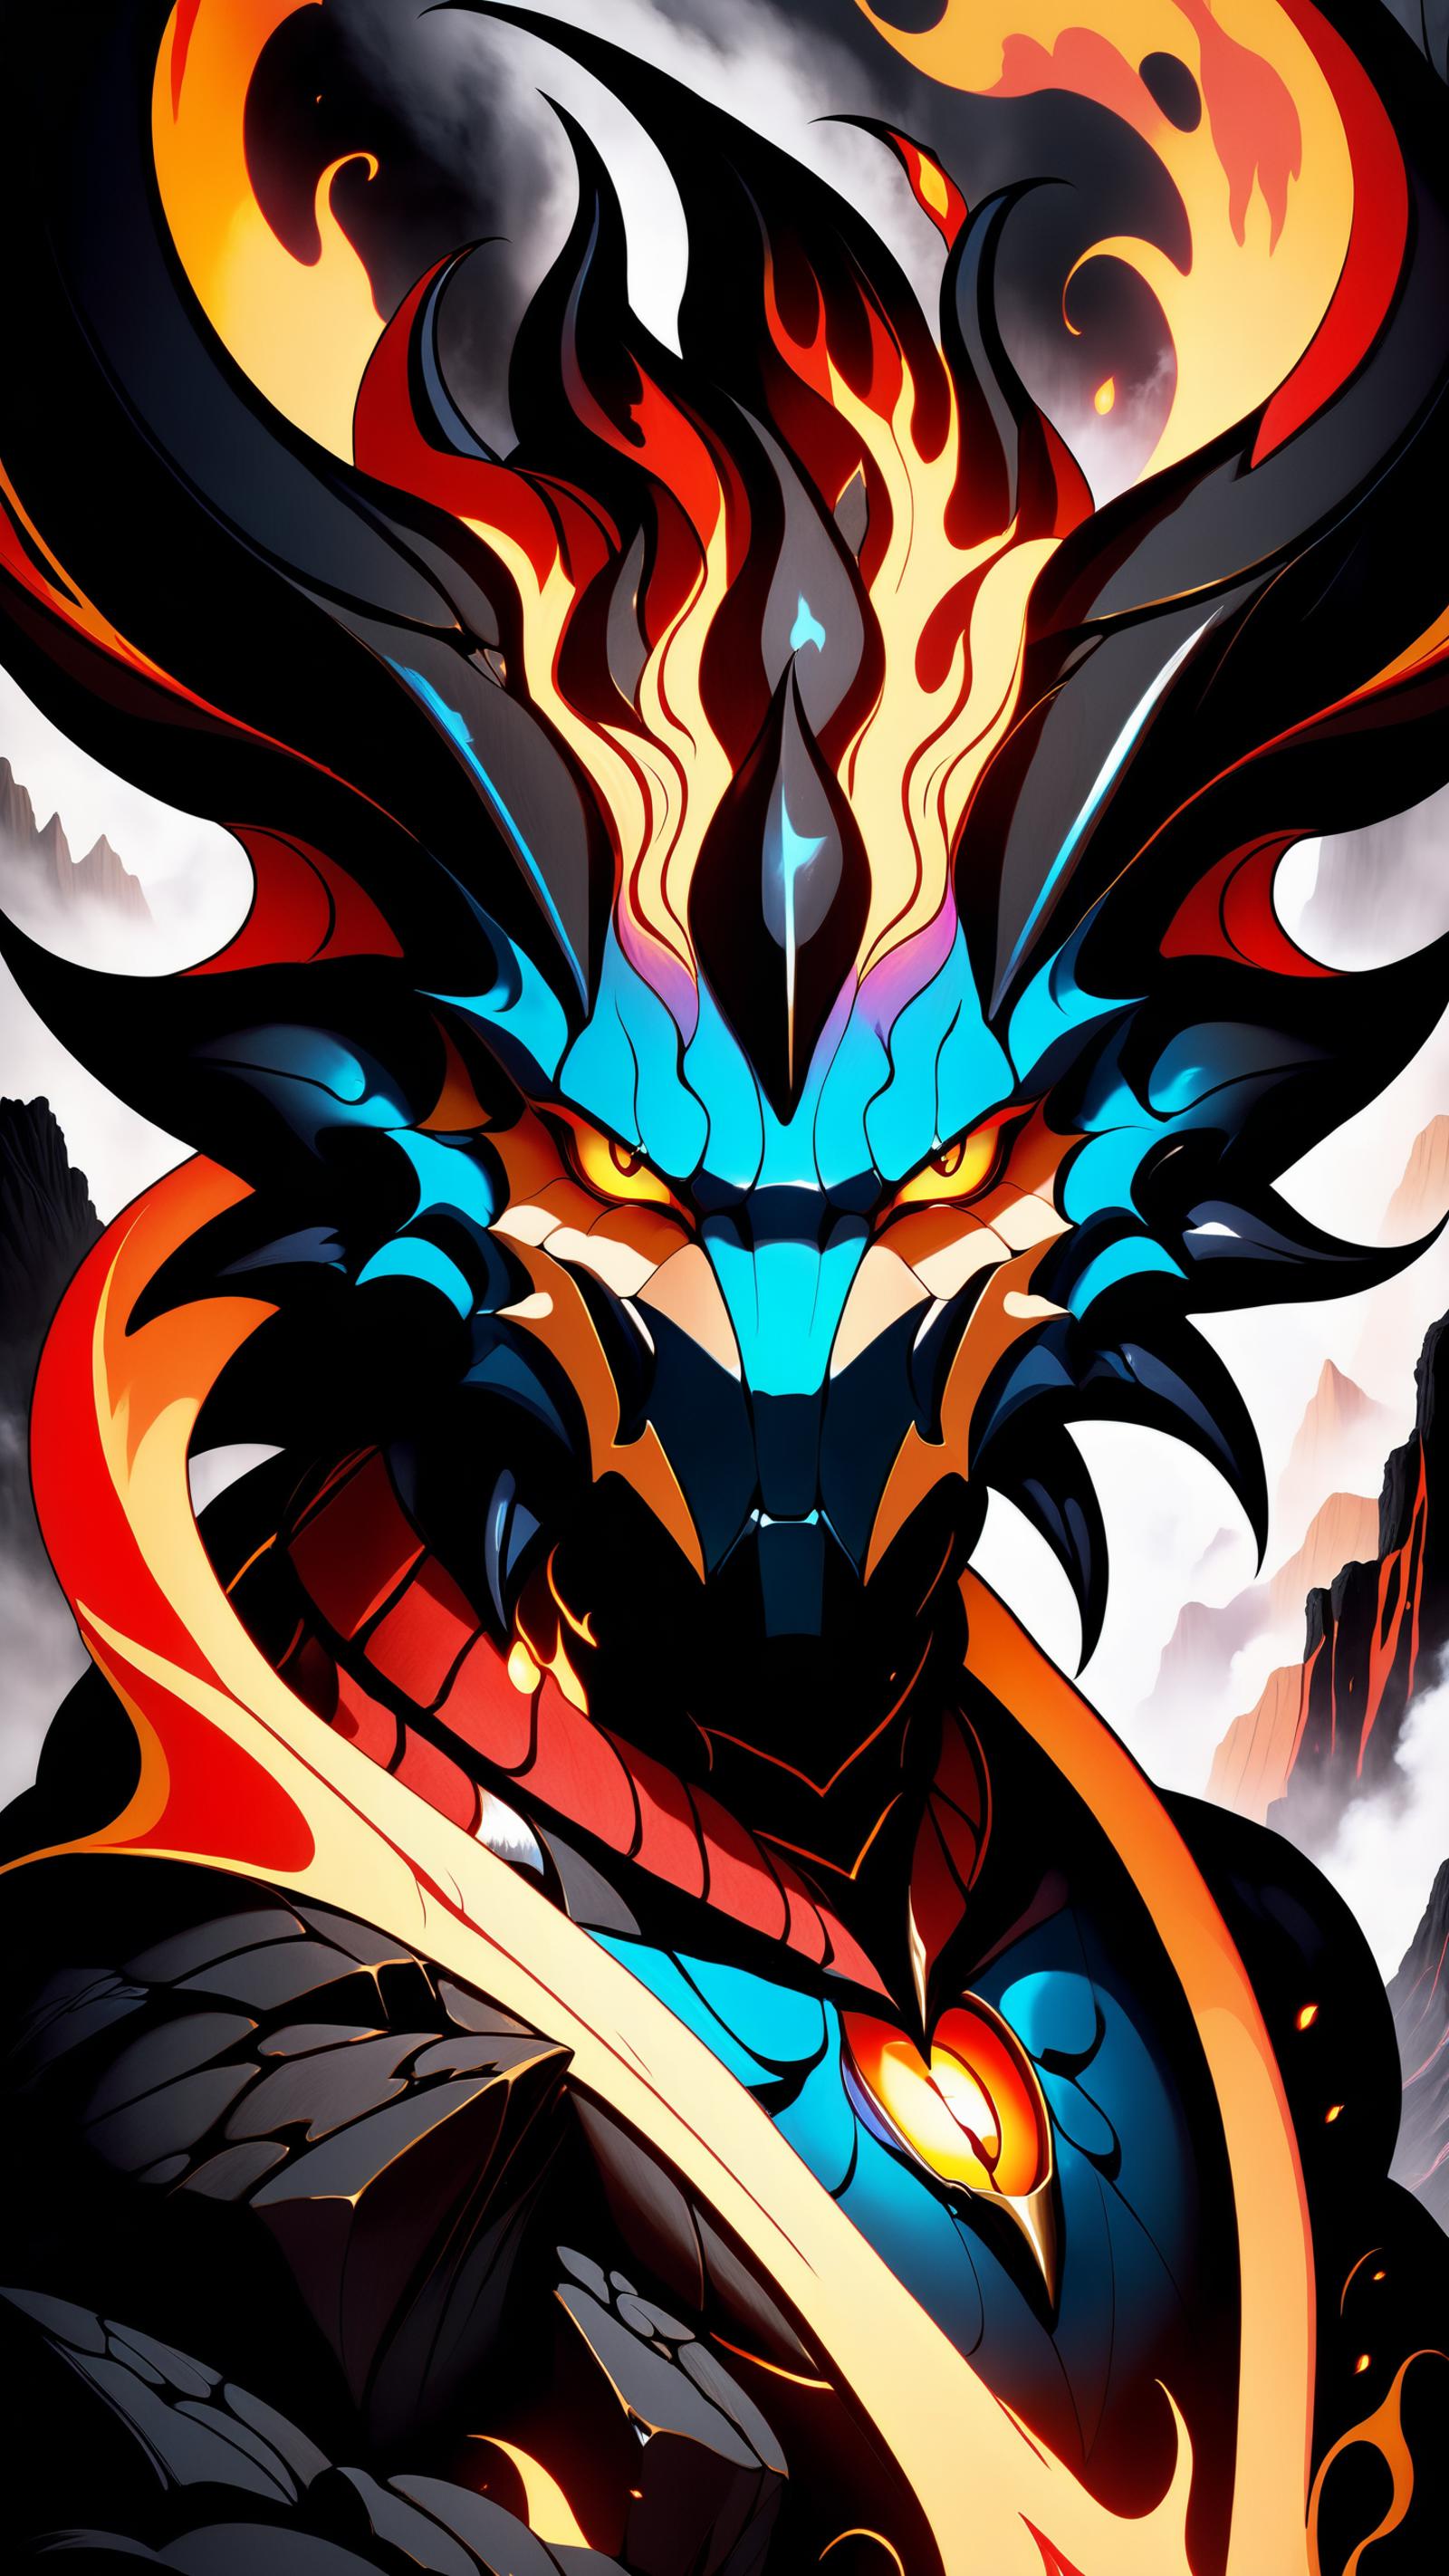 A colorful digital artwork of a blue and black dragon with fiery eyes and a long neck.